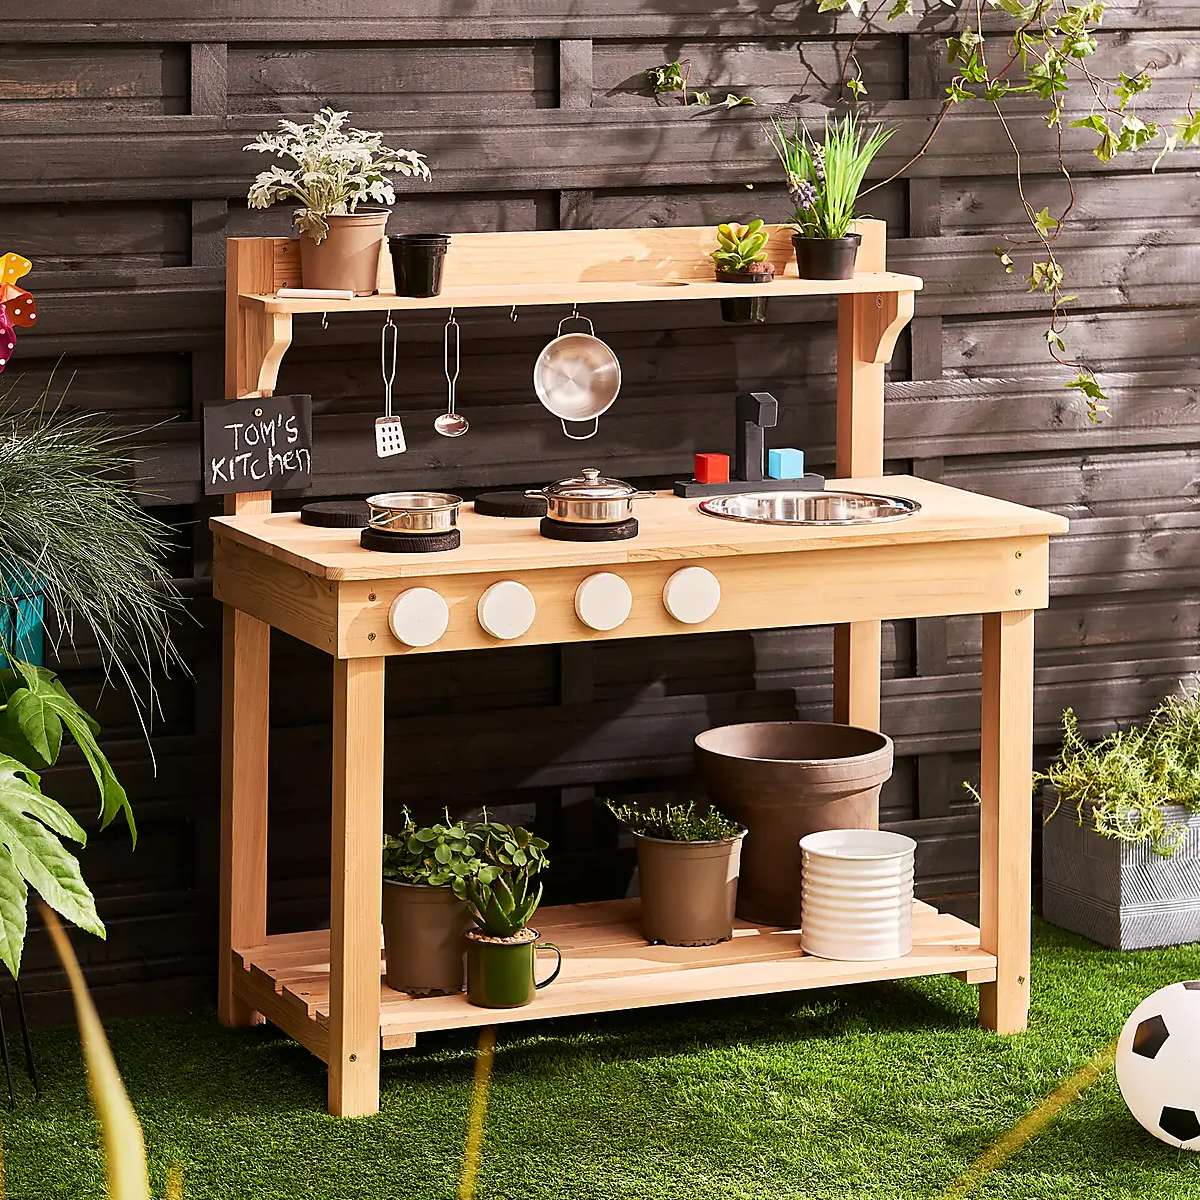 Wooden Mud Kitchen with Utensiles, Pots & Pans, Plant Pots and ...